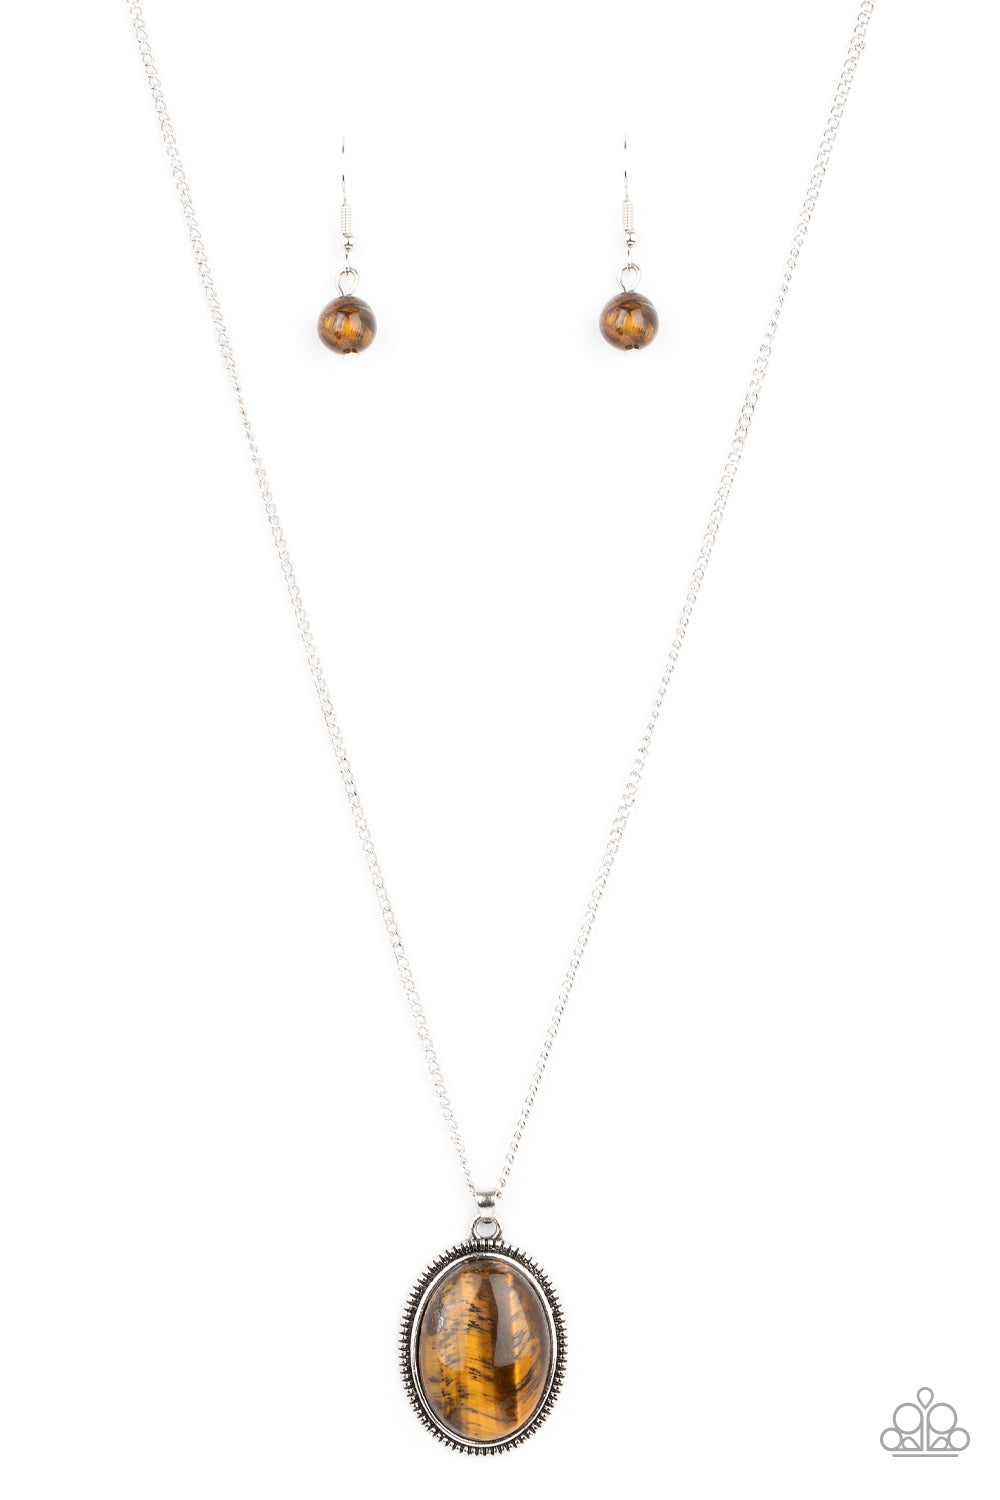 Tranquil Talisman Brown Necklace - Paparazzi Accessories. An oval tiger's eye stone is pressed into the center of a studded silver frame, creating a tranquil pendant below the collar. Features an adjustable clasp closure.  All Paparazzi Accessories are lead free and nickel free!  Sold as one individual necklace. Includes one pair of matching earrings.